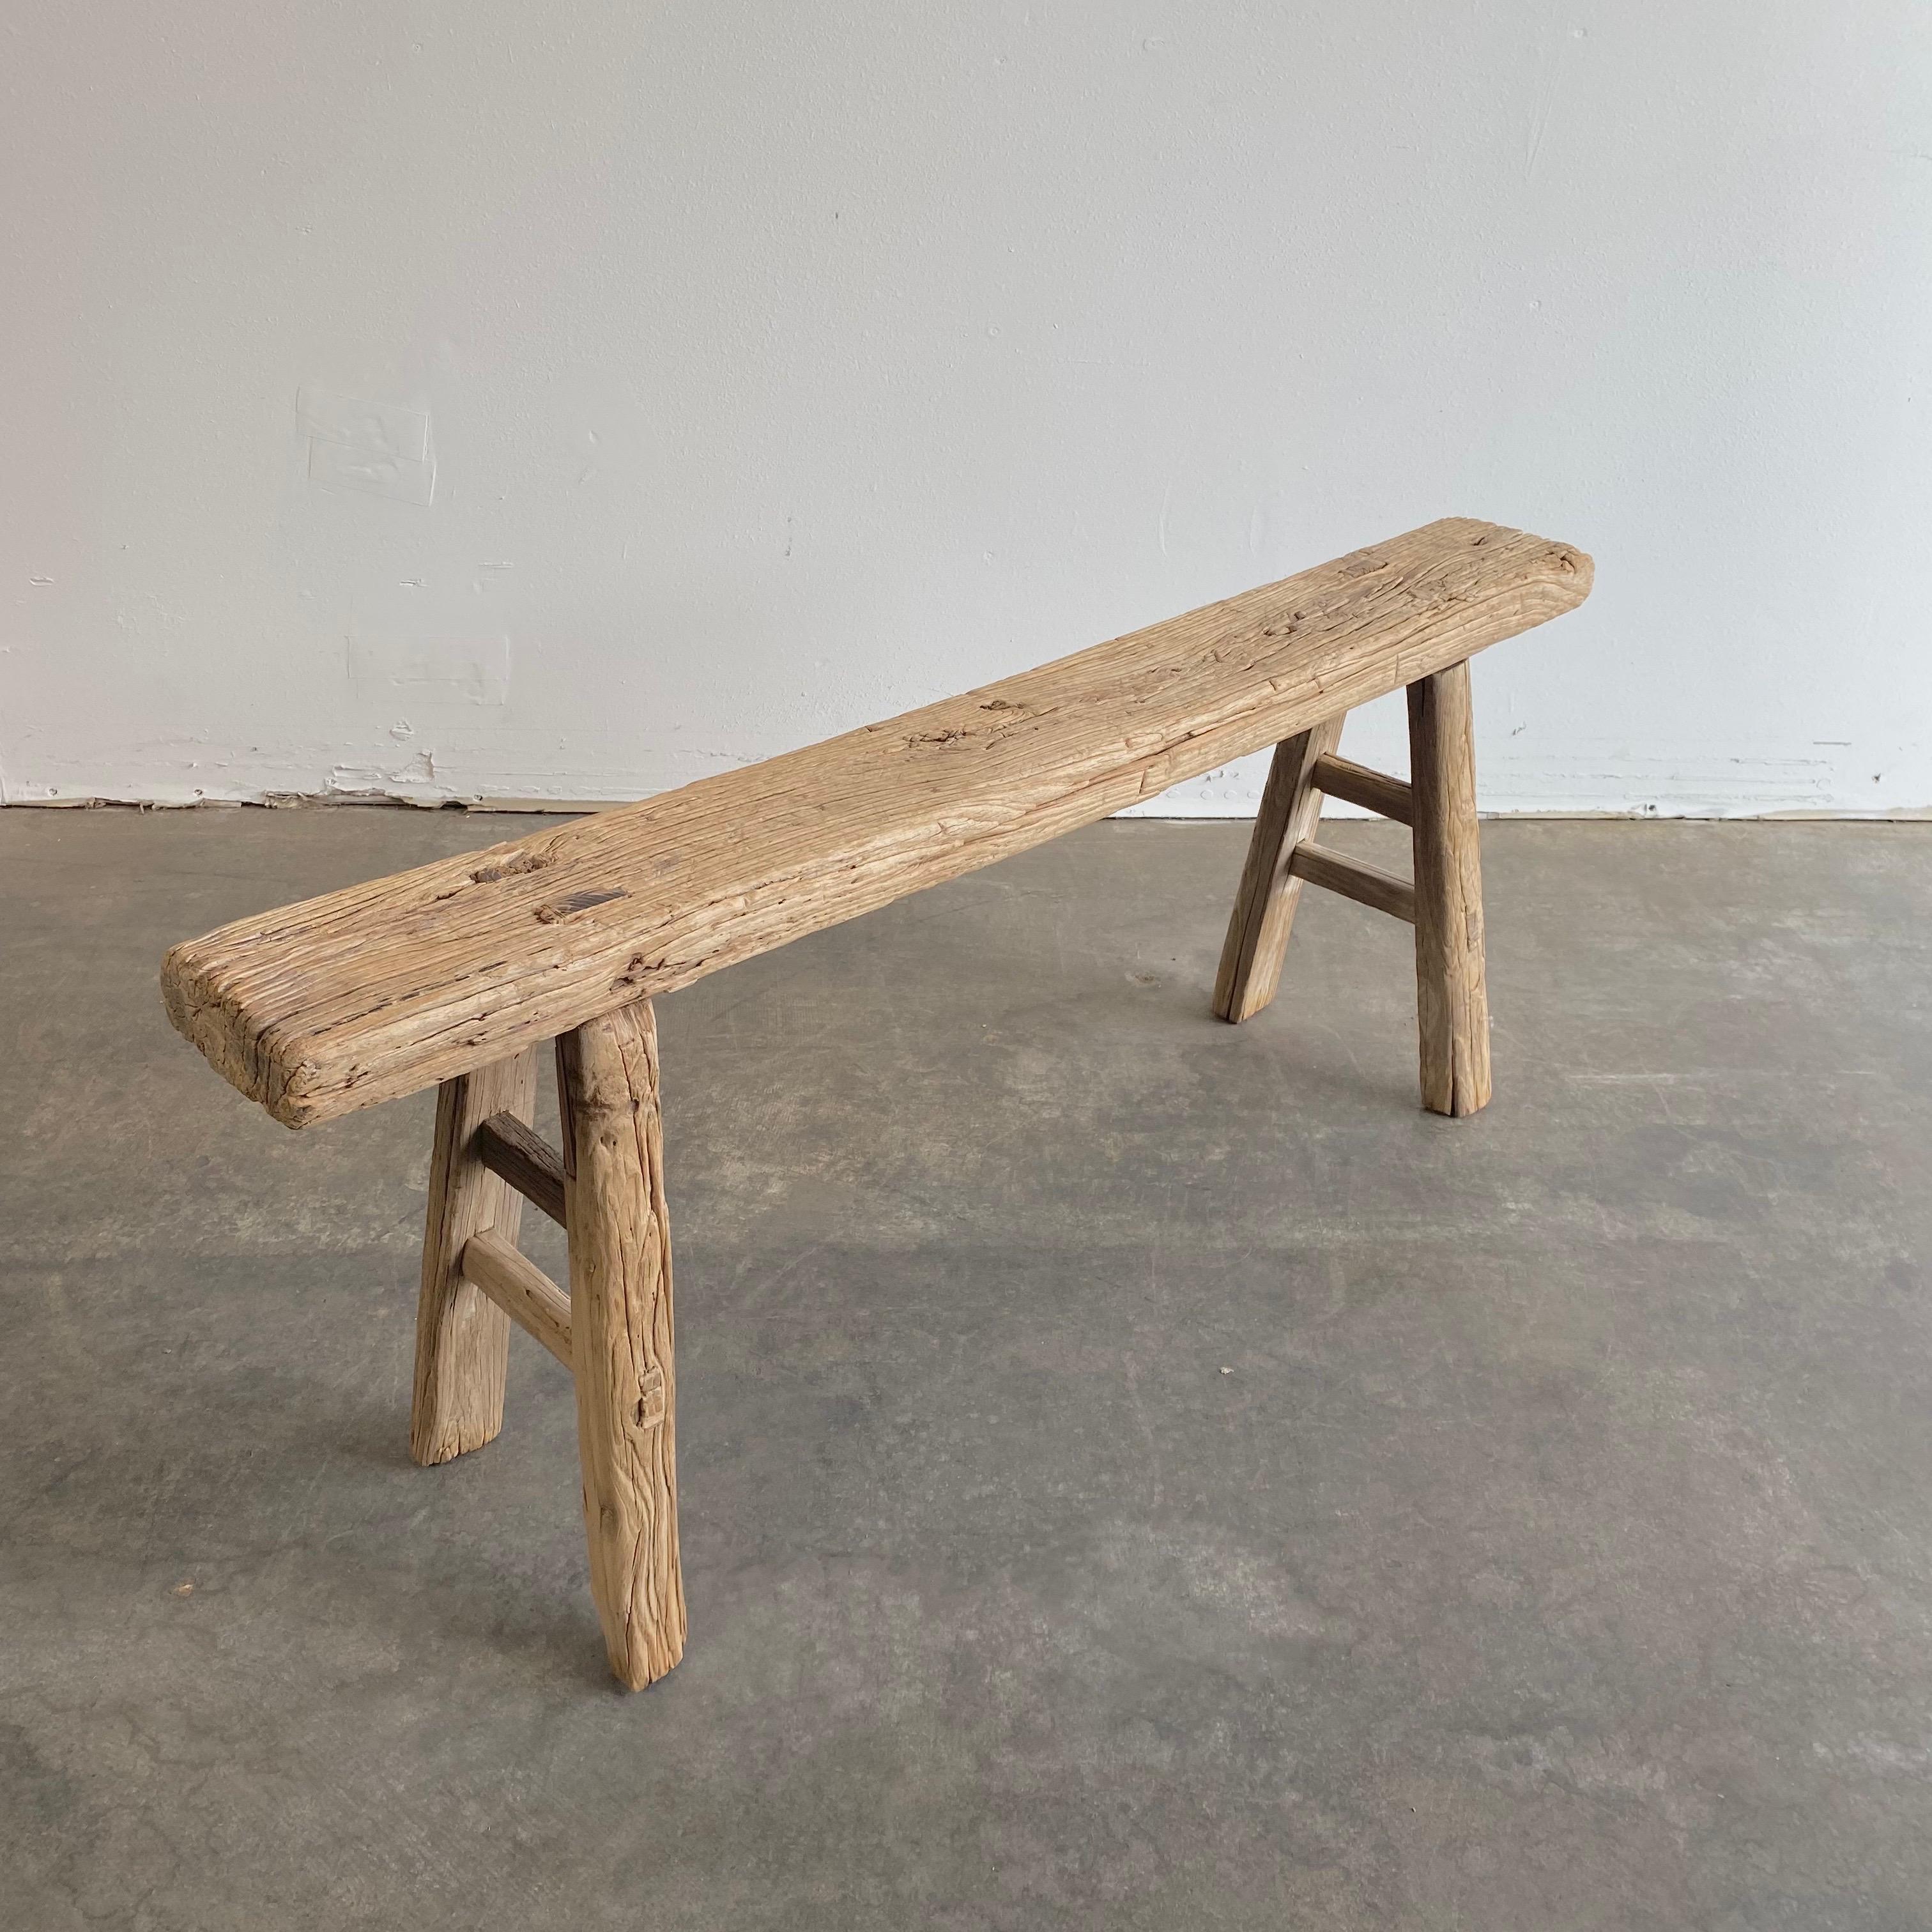 Vintage antique elm wood skinny bench
These are the real vintage antique elm wood skinny benches! Beautiful antique patina, with weathering and age, these are solid and sturdy ready for daily use, use as as a table behind a sofa, stool, coffee